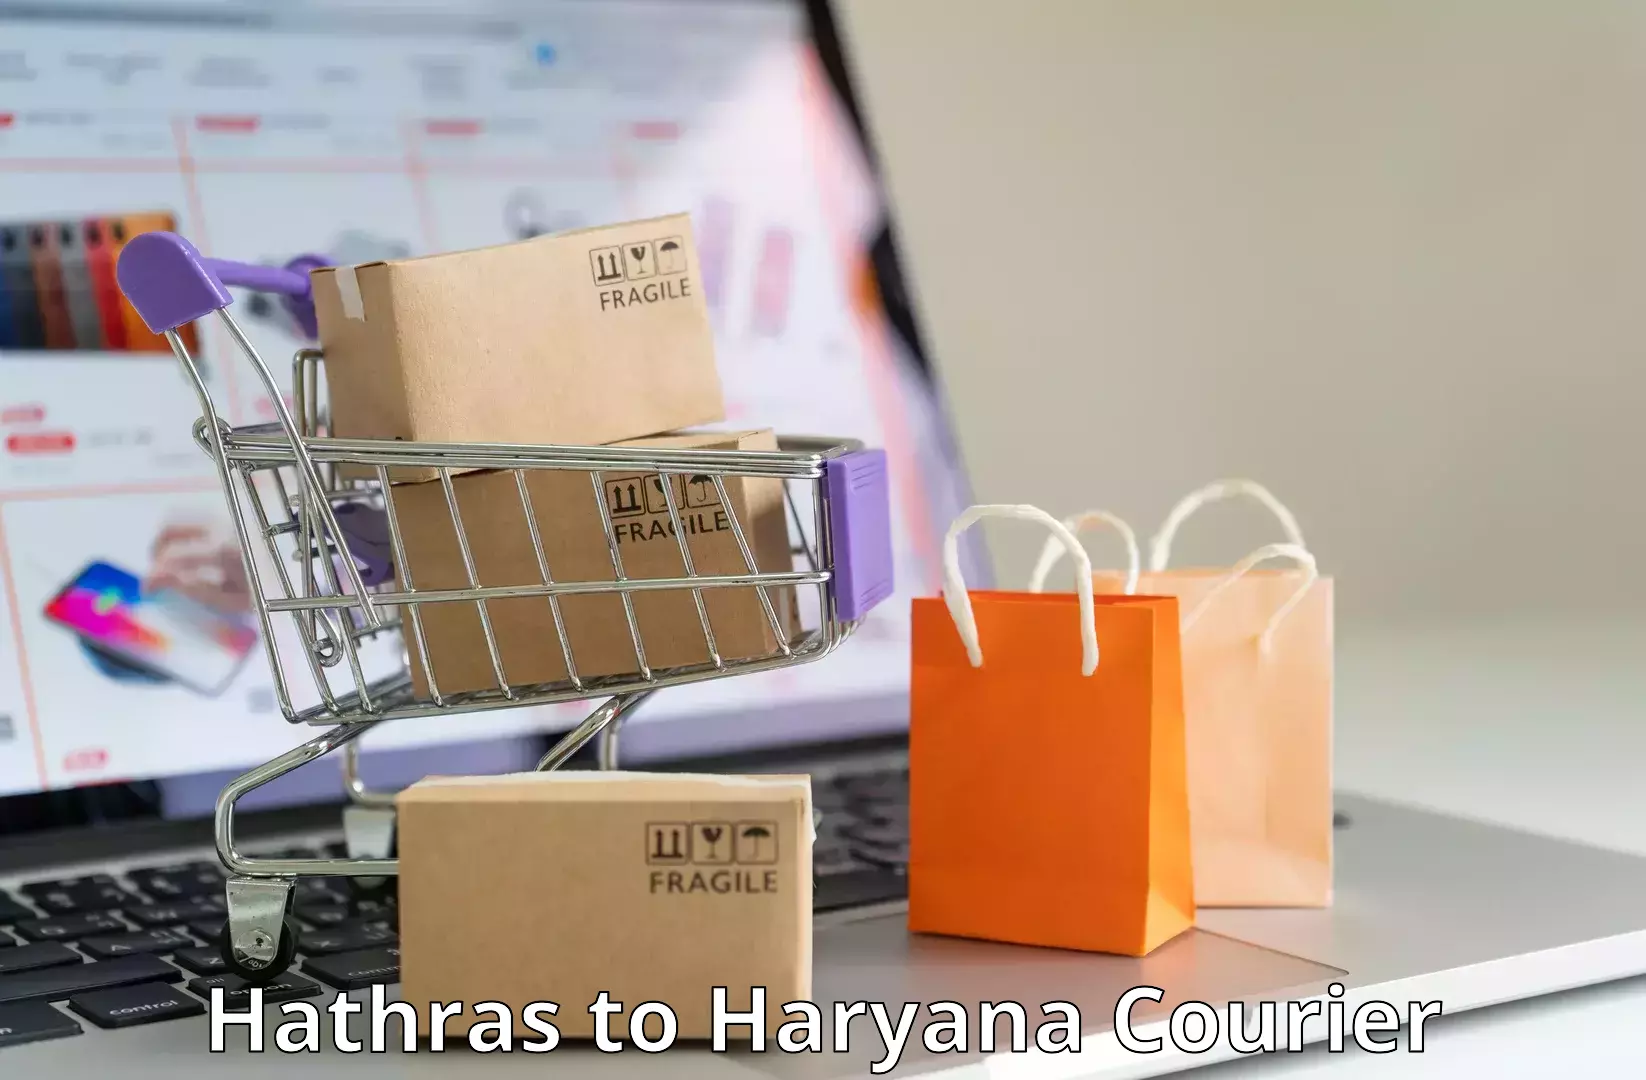 Next-day delivery options Hathras to Gohana